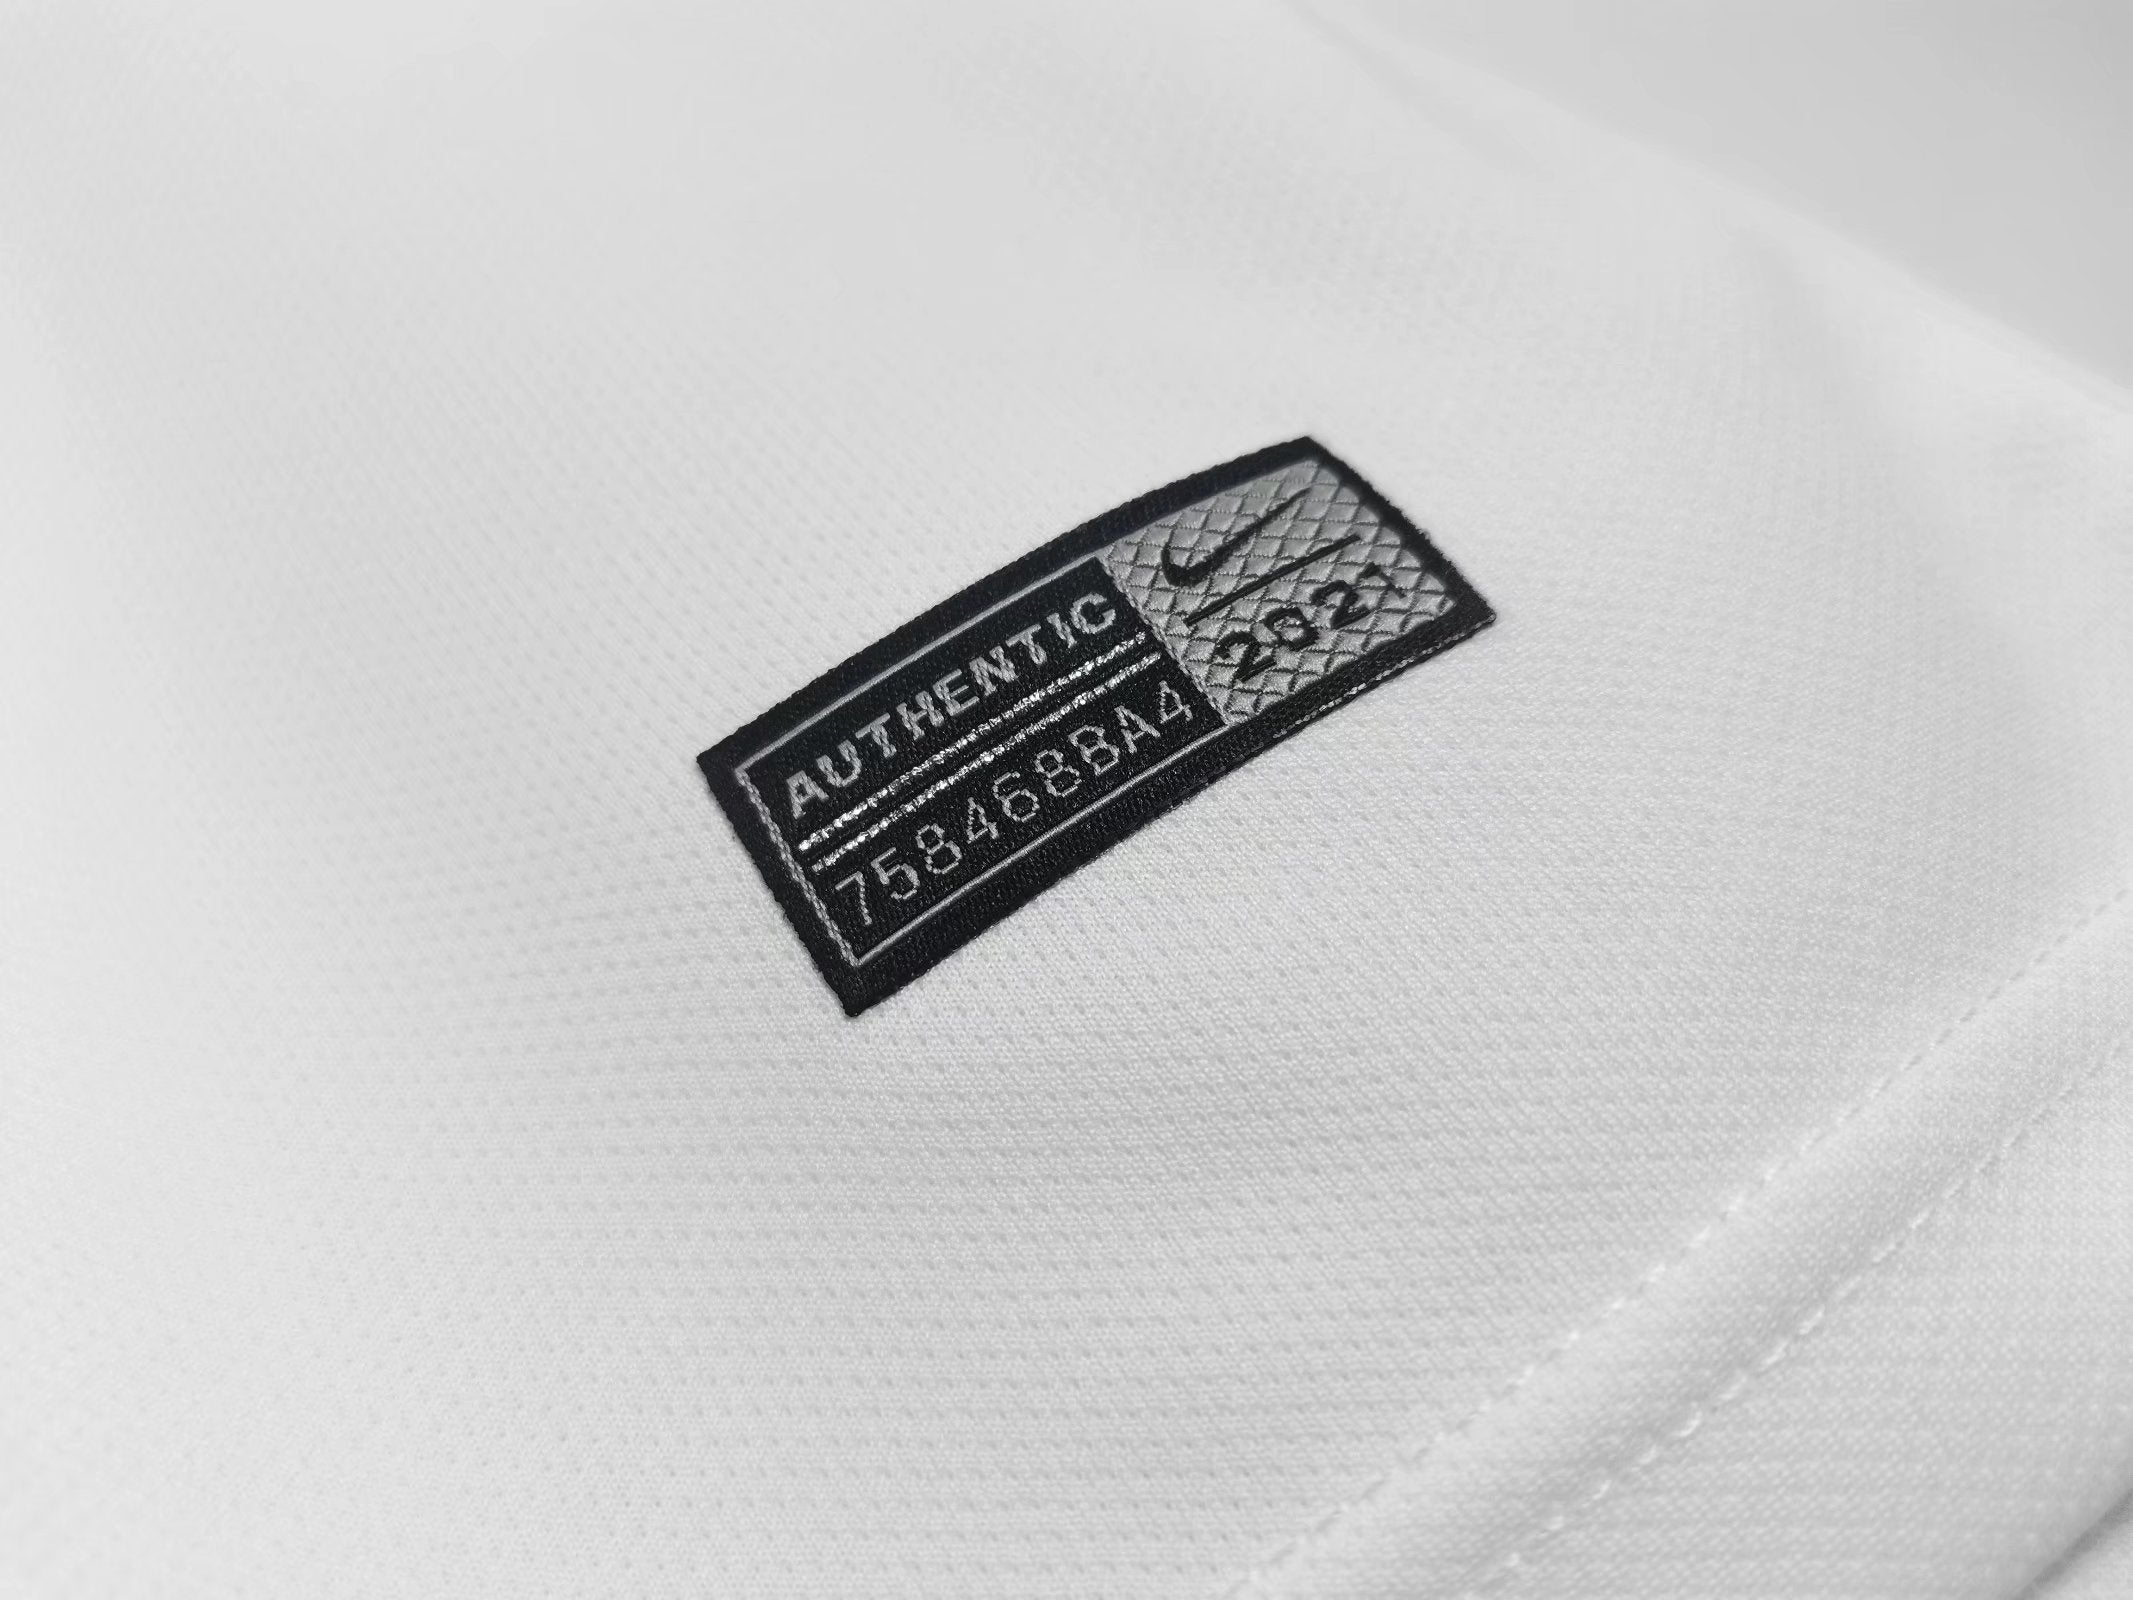 PSG White Edition 2020 – The Football Heritage